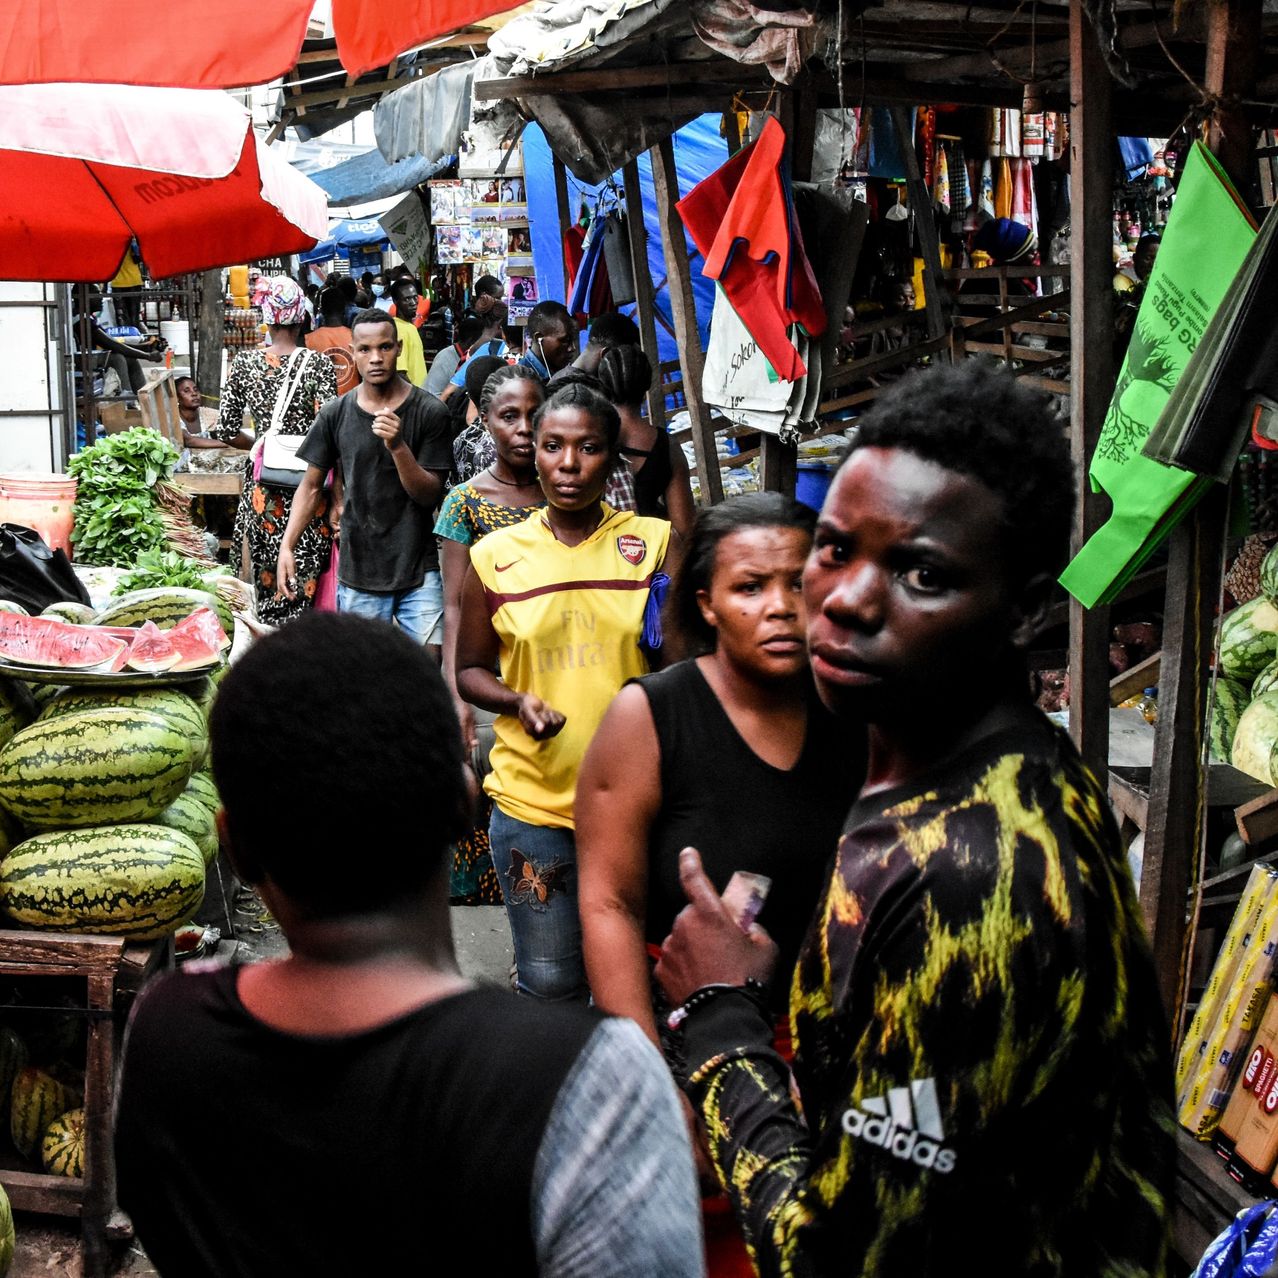 People walked at a market without adhering to social-distancing rules amid a coronavirus outbreak in Dar es Salaam, Tanzania, in April. ERICKY BONIPHACE/AGENCE FRANCE-PRESSE/GETTY IMAGES